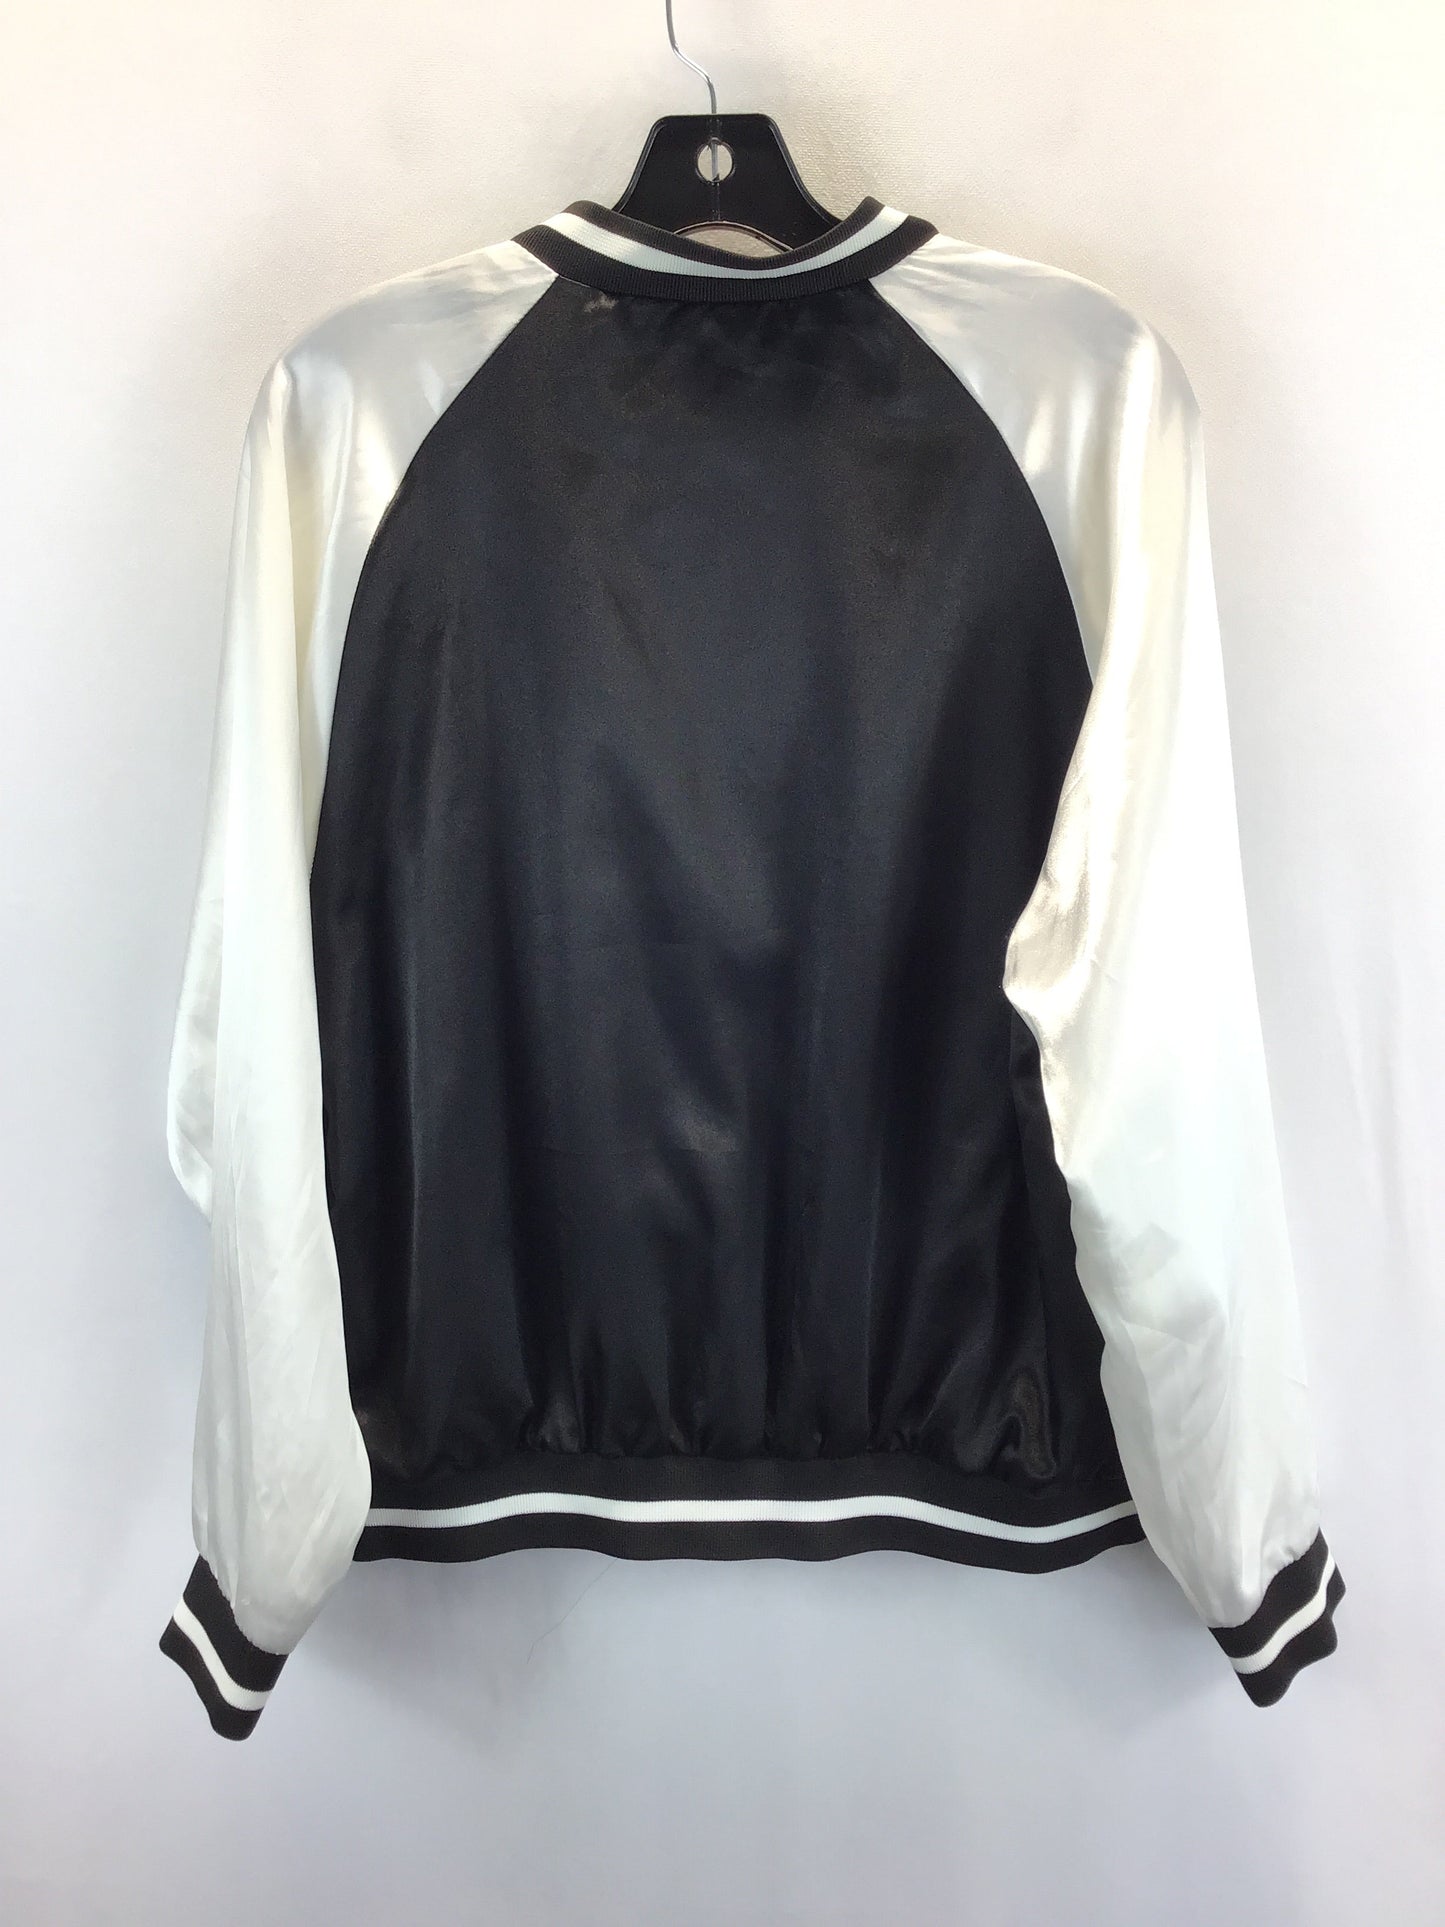 Black & White Jacket Other New Look, Size 1x